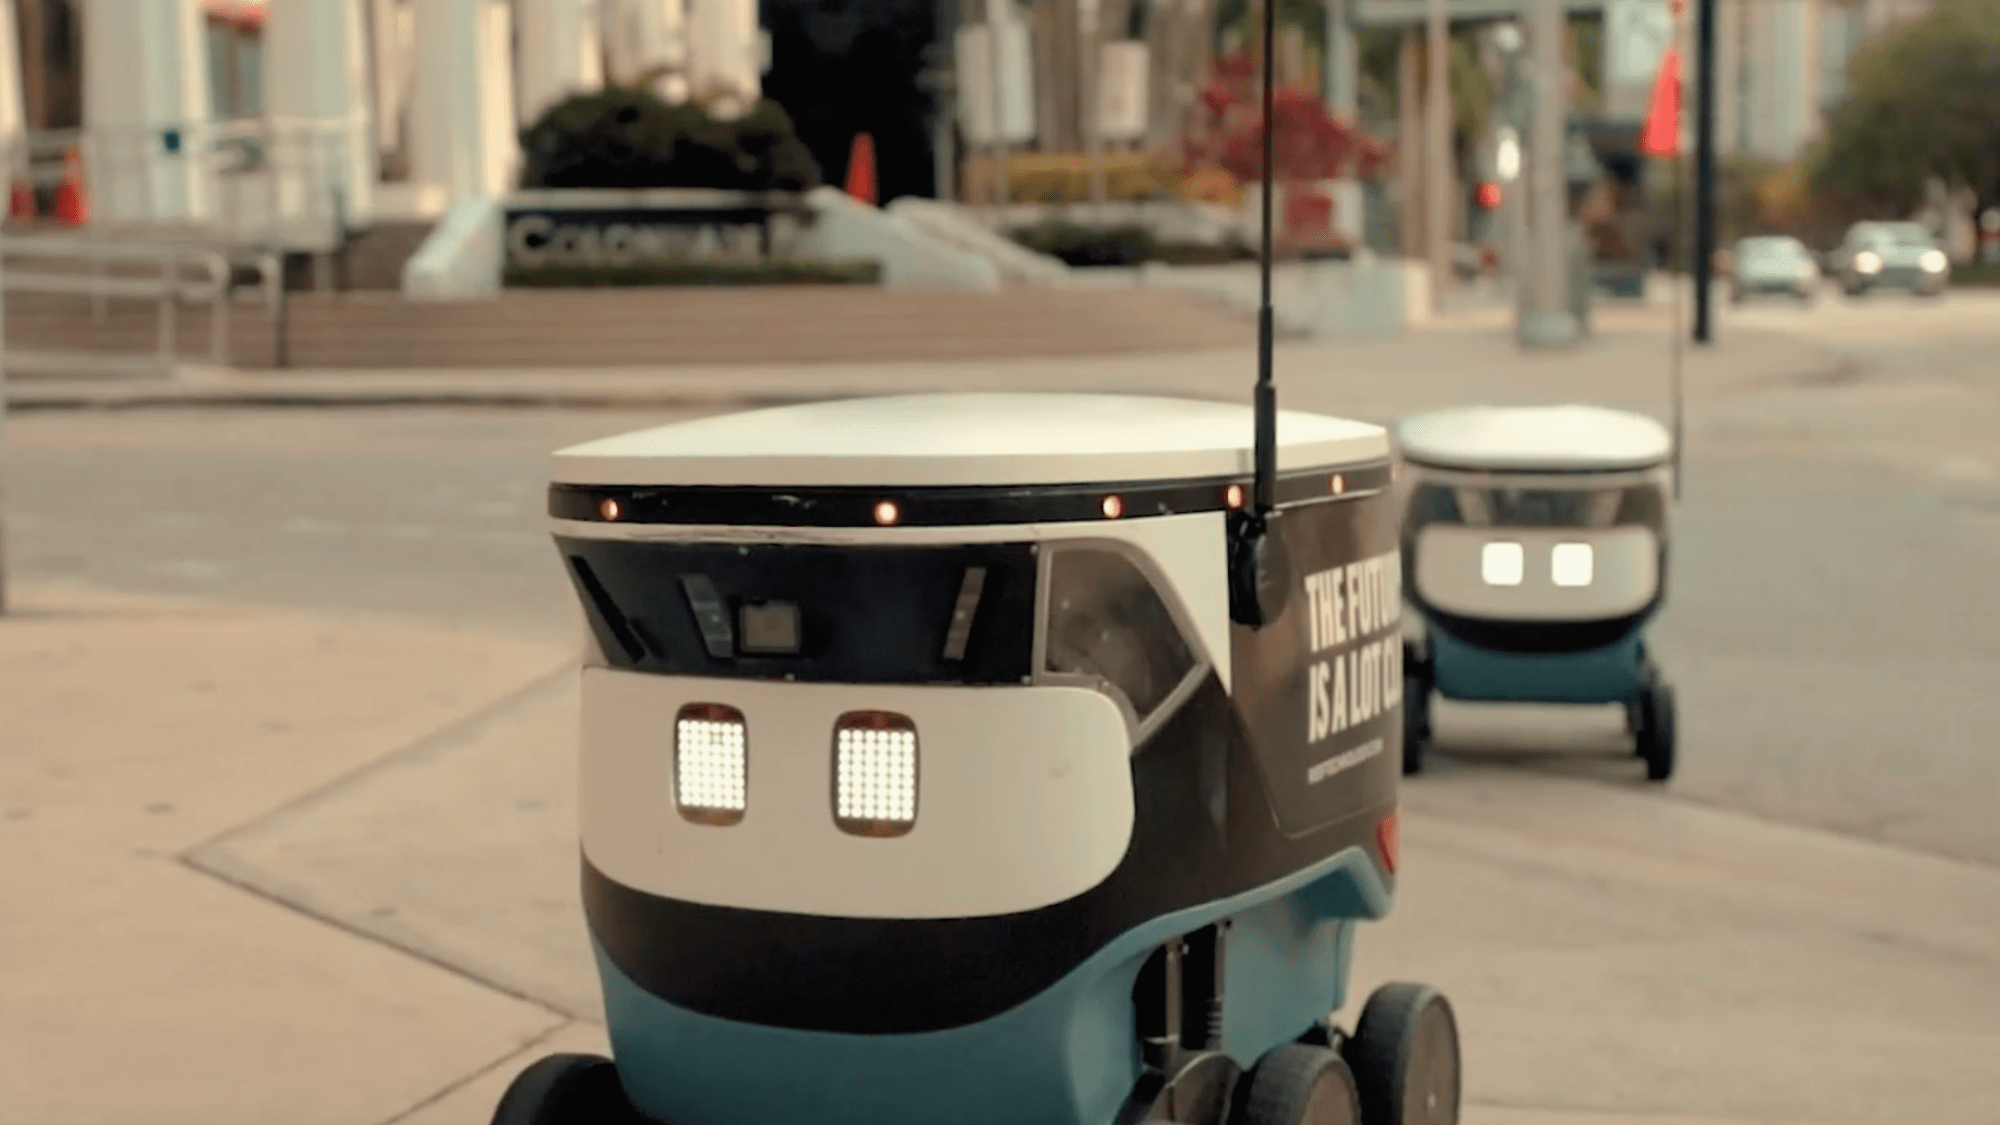 UberEats is rolling out a fleet of self-driving delivery robots in Miami